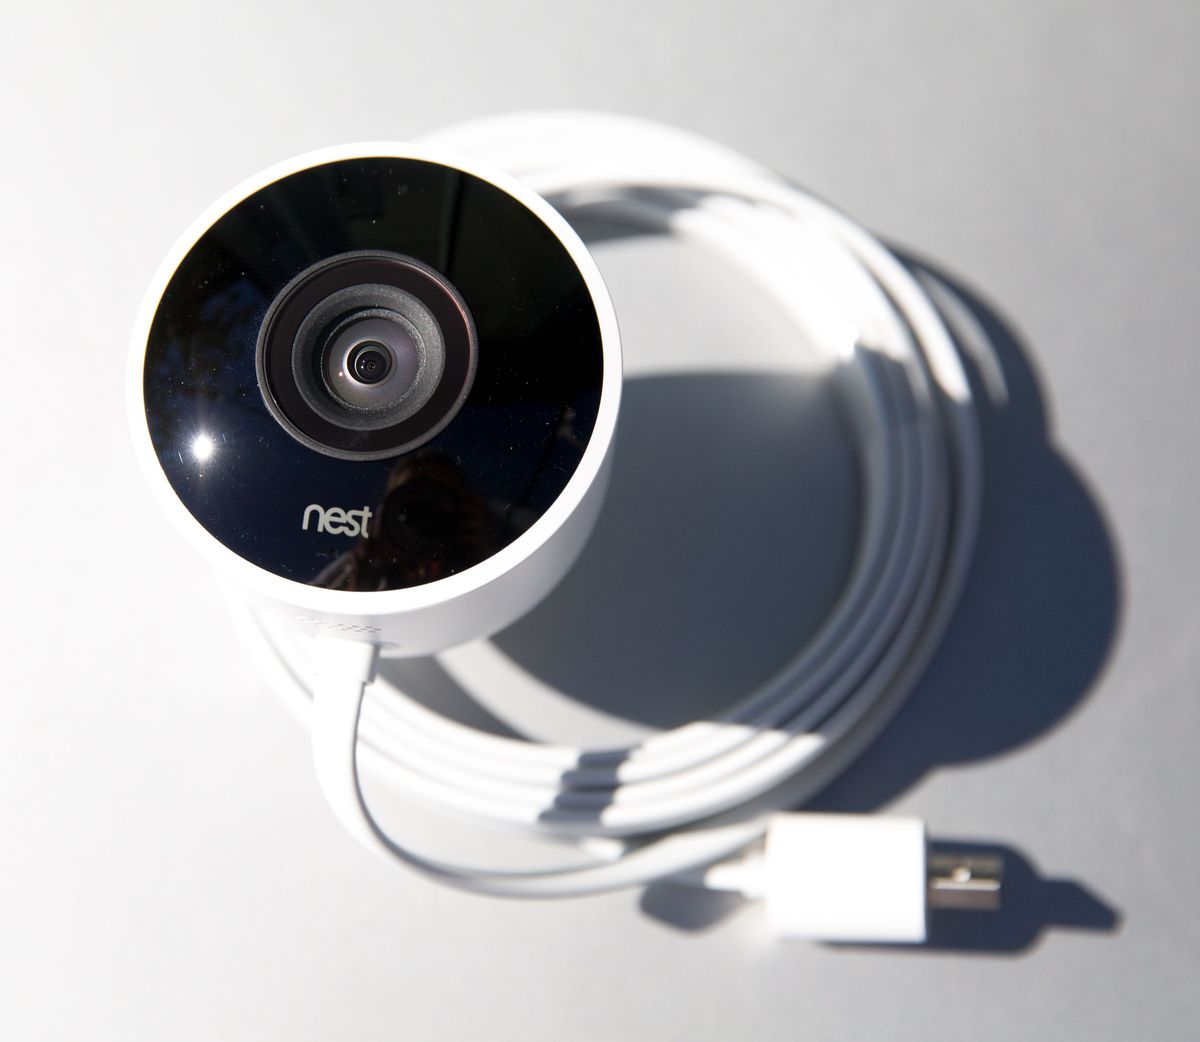 The Nest Cam Outdoor is a wired device (for power), but wireless for connectivity.